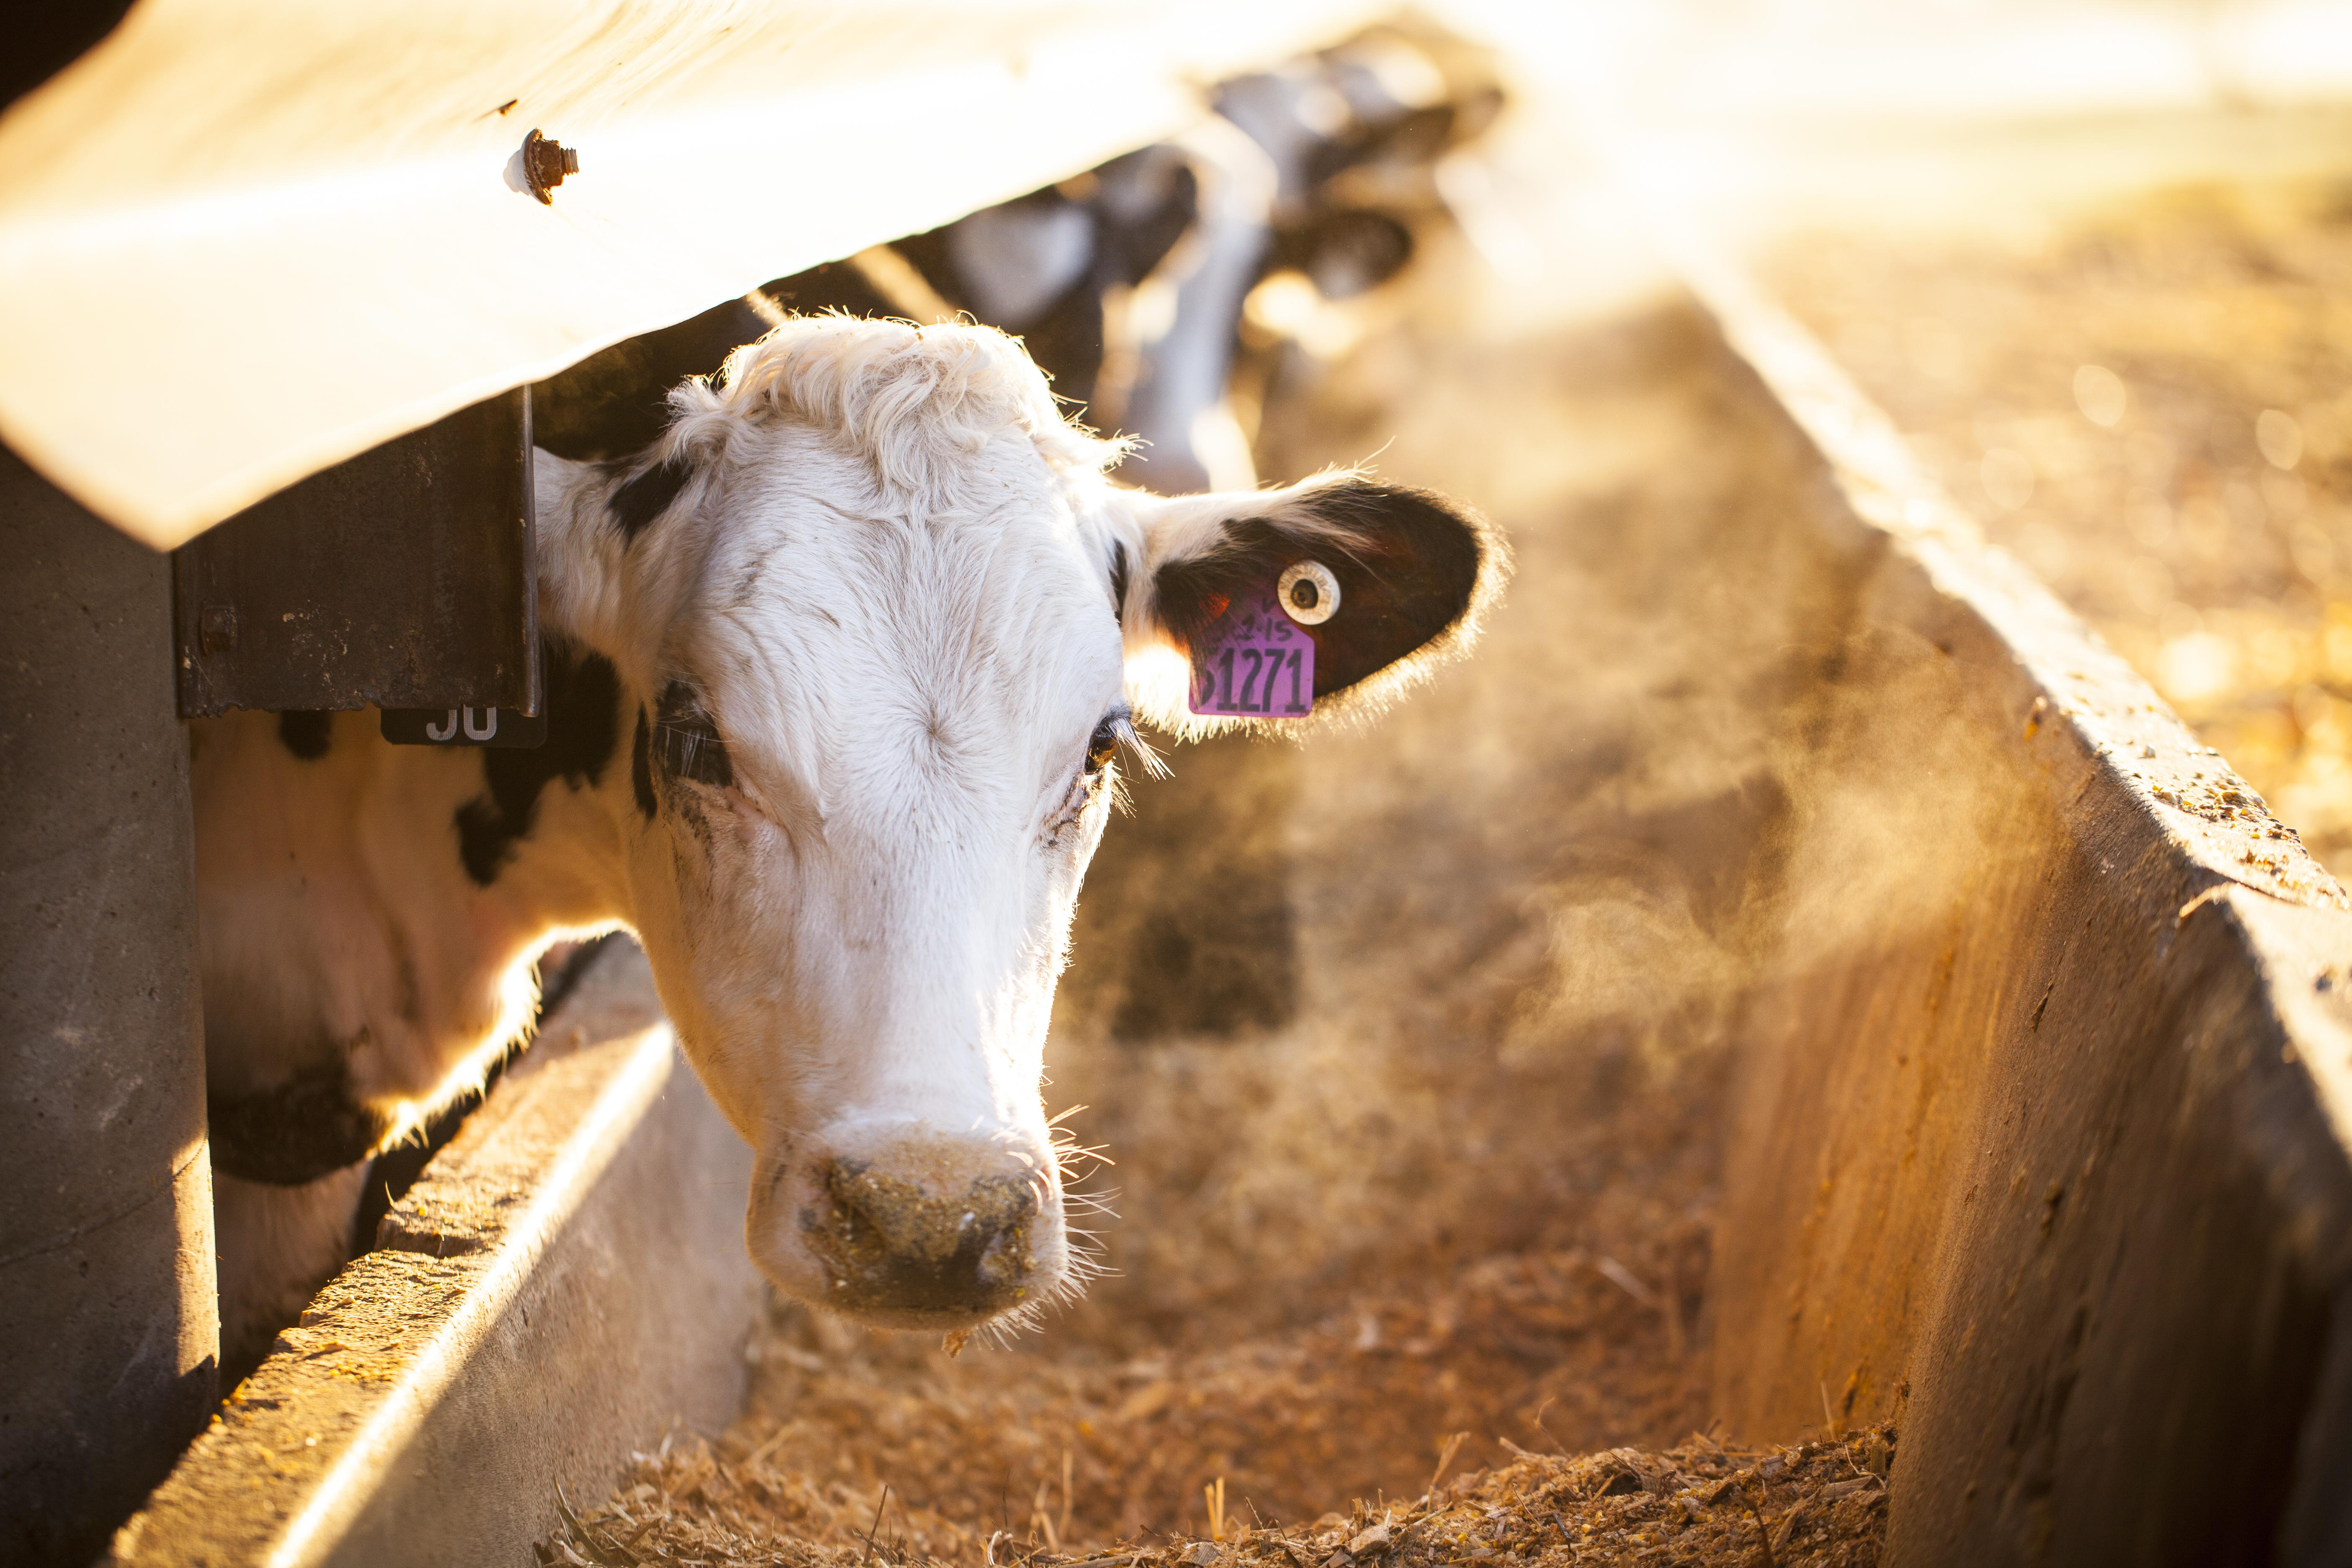 By utilizing various types of fly control products found in the Starbar line, dairy producers are able to keep populations below the economic threshold. 